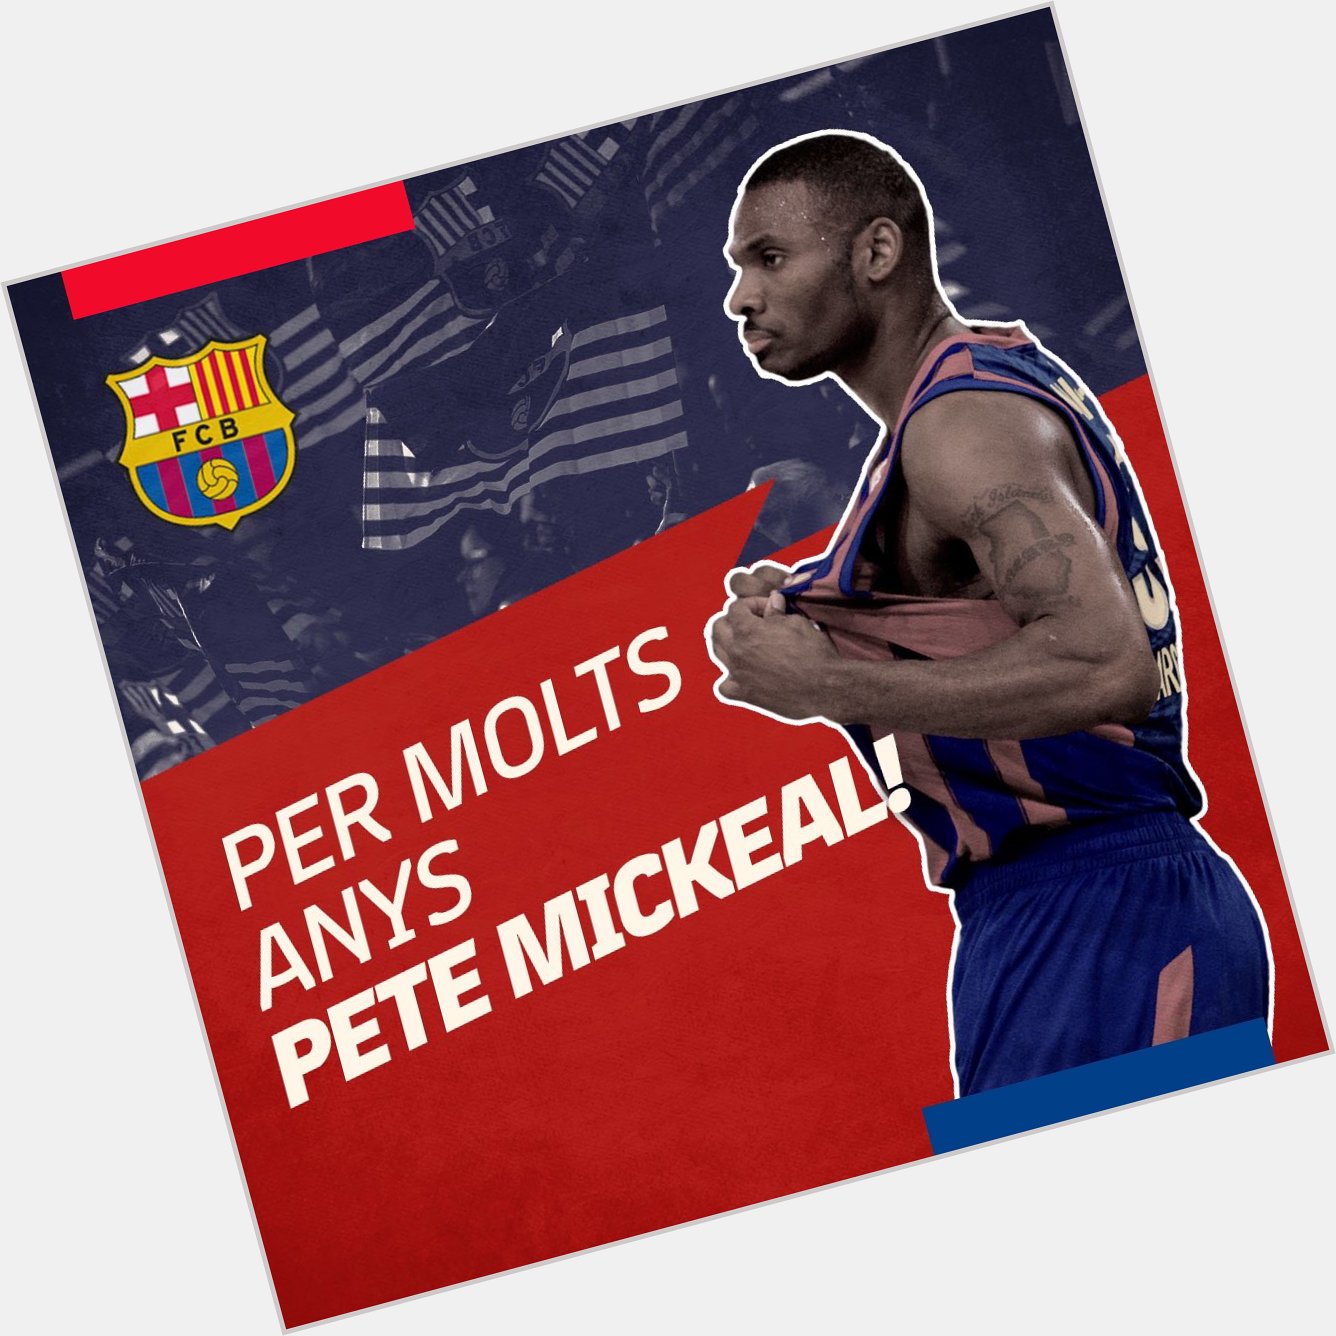  Happy birthday Pete! Muchas felicidades, Pete Mickeal! Per molts anys    